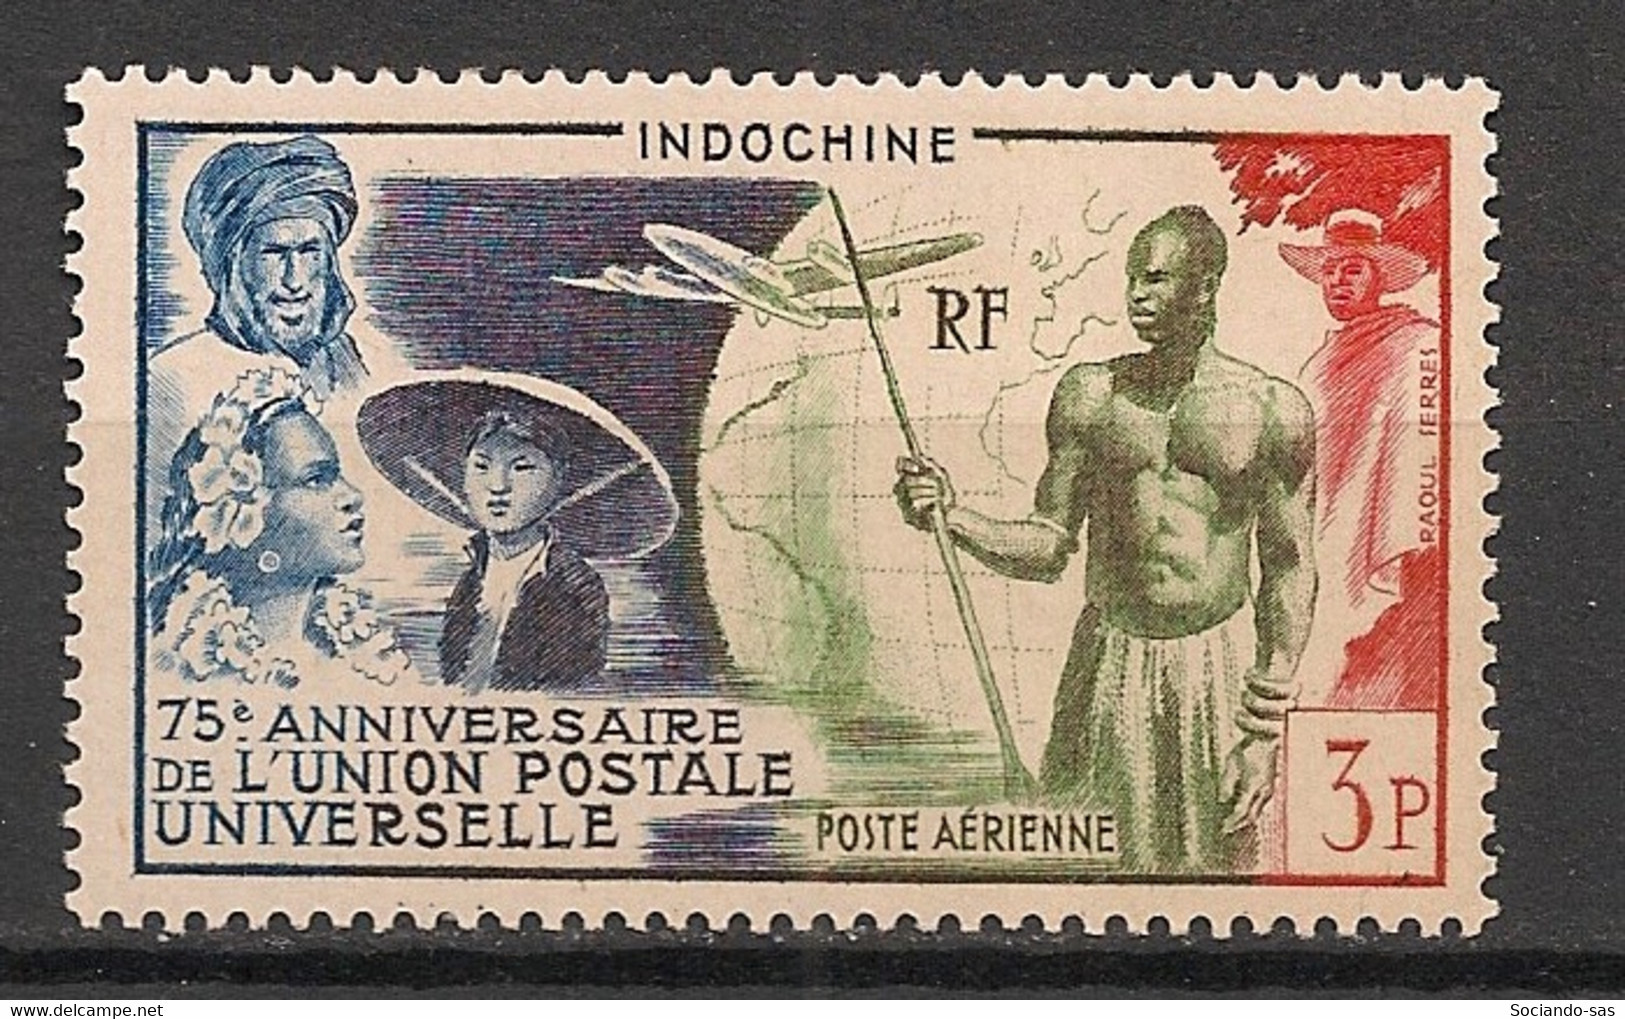 INDOCHINE - 1949 - Poste Aérienne PA N°YT. 48 - UPU / Union Postale Universelle - Neuf * / MH VF - Airmail